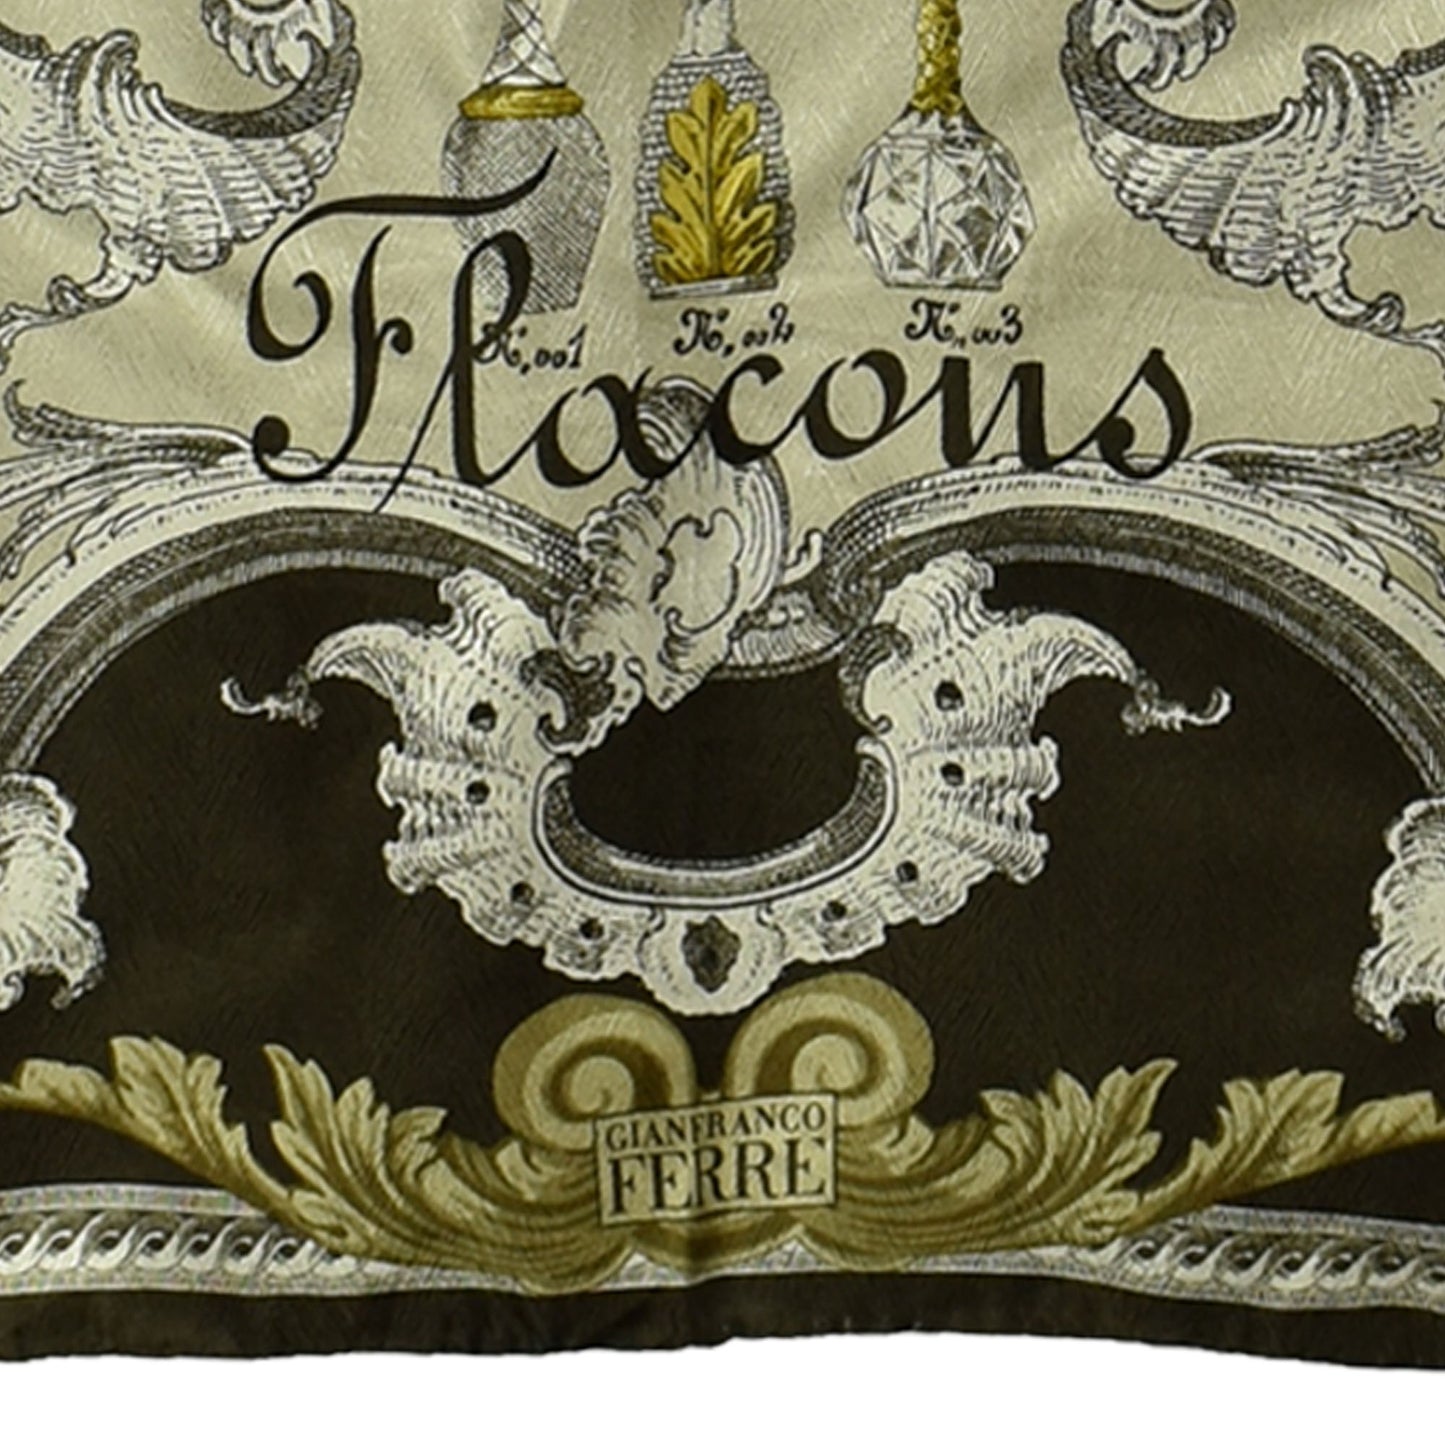 Vintage Gianfranco Ferre “Flacons Frame” Pattern Silk Scarf Made in Italy